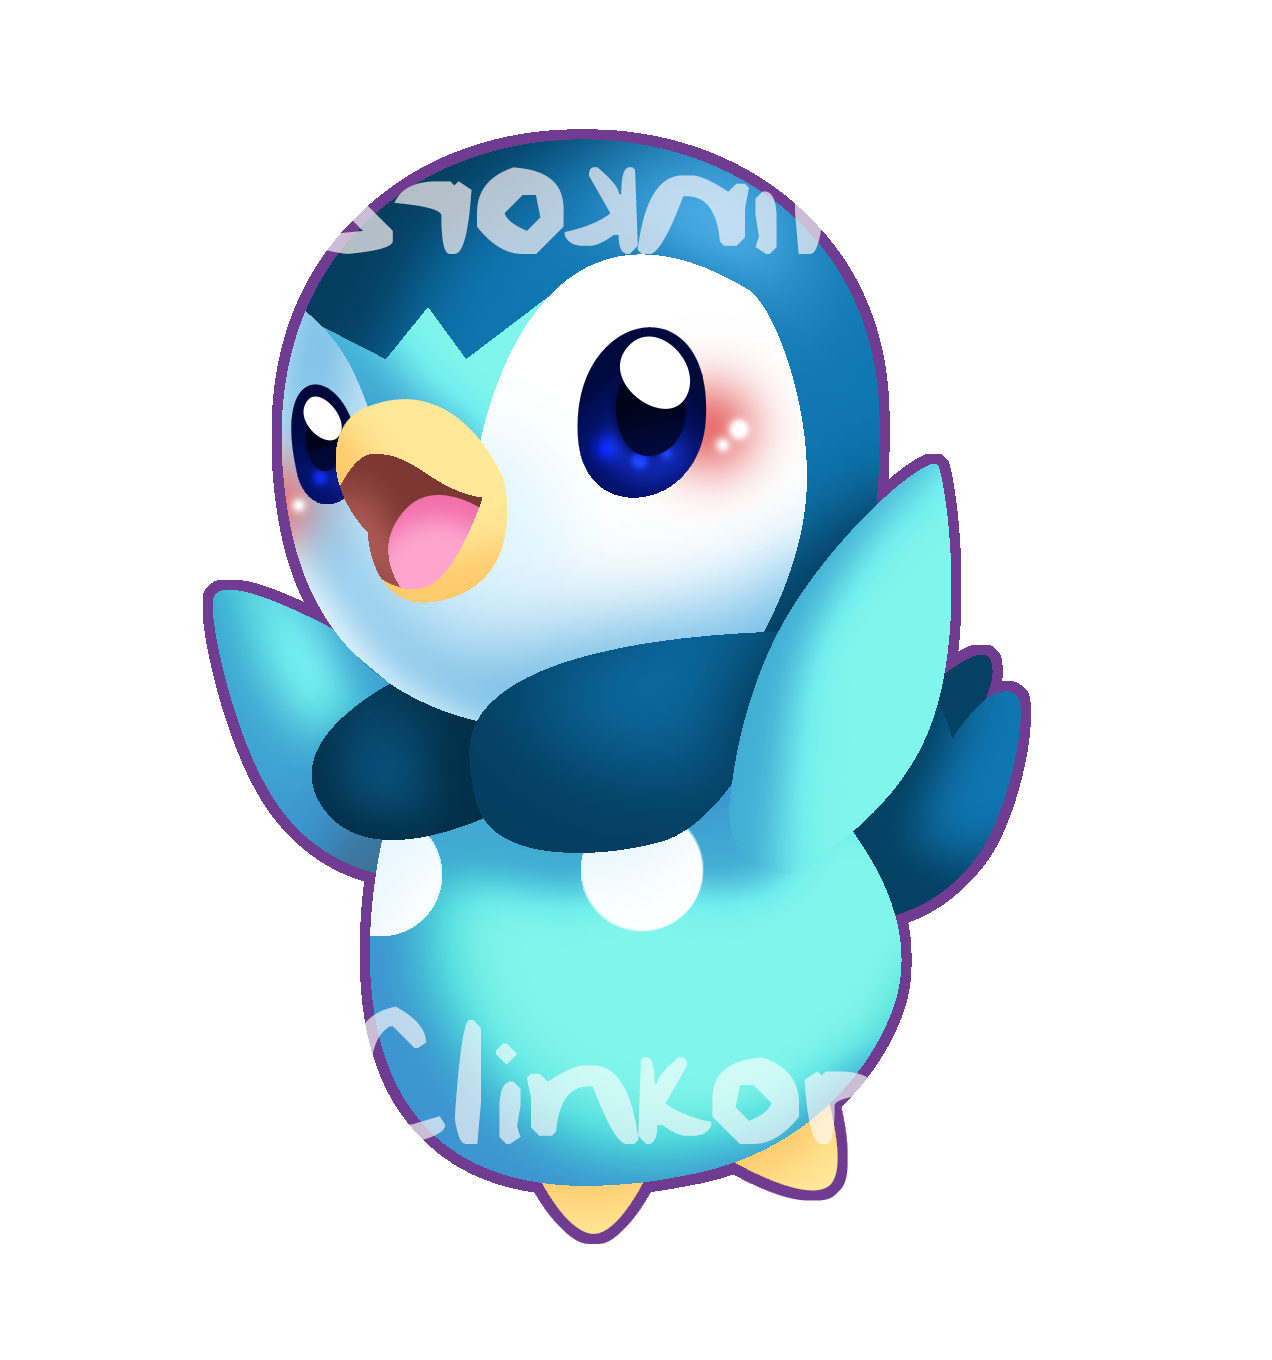 393 Piplup